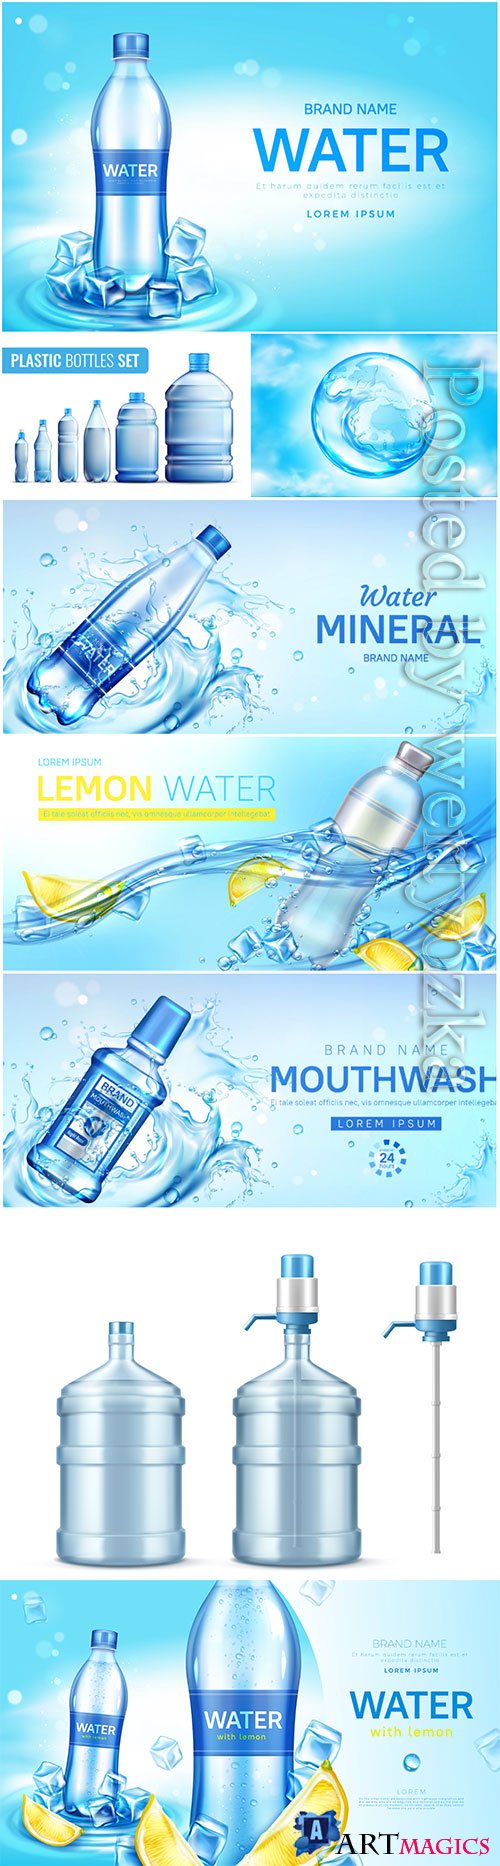 Water bottle ad banner, flask with drink, splashing water drops in vector # 3